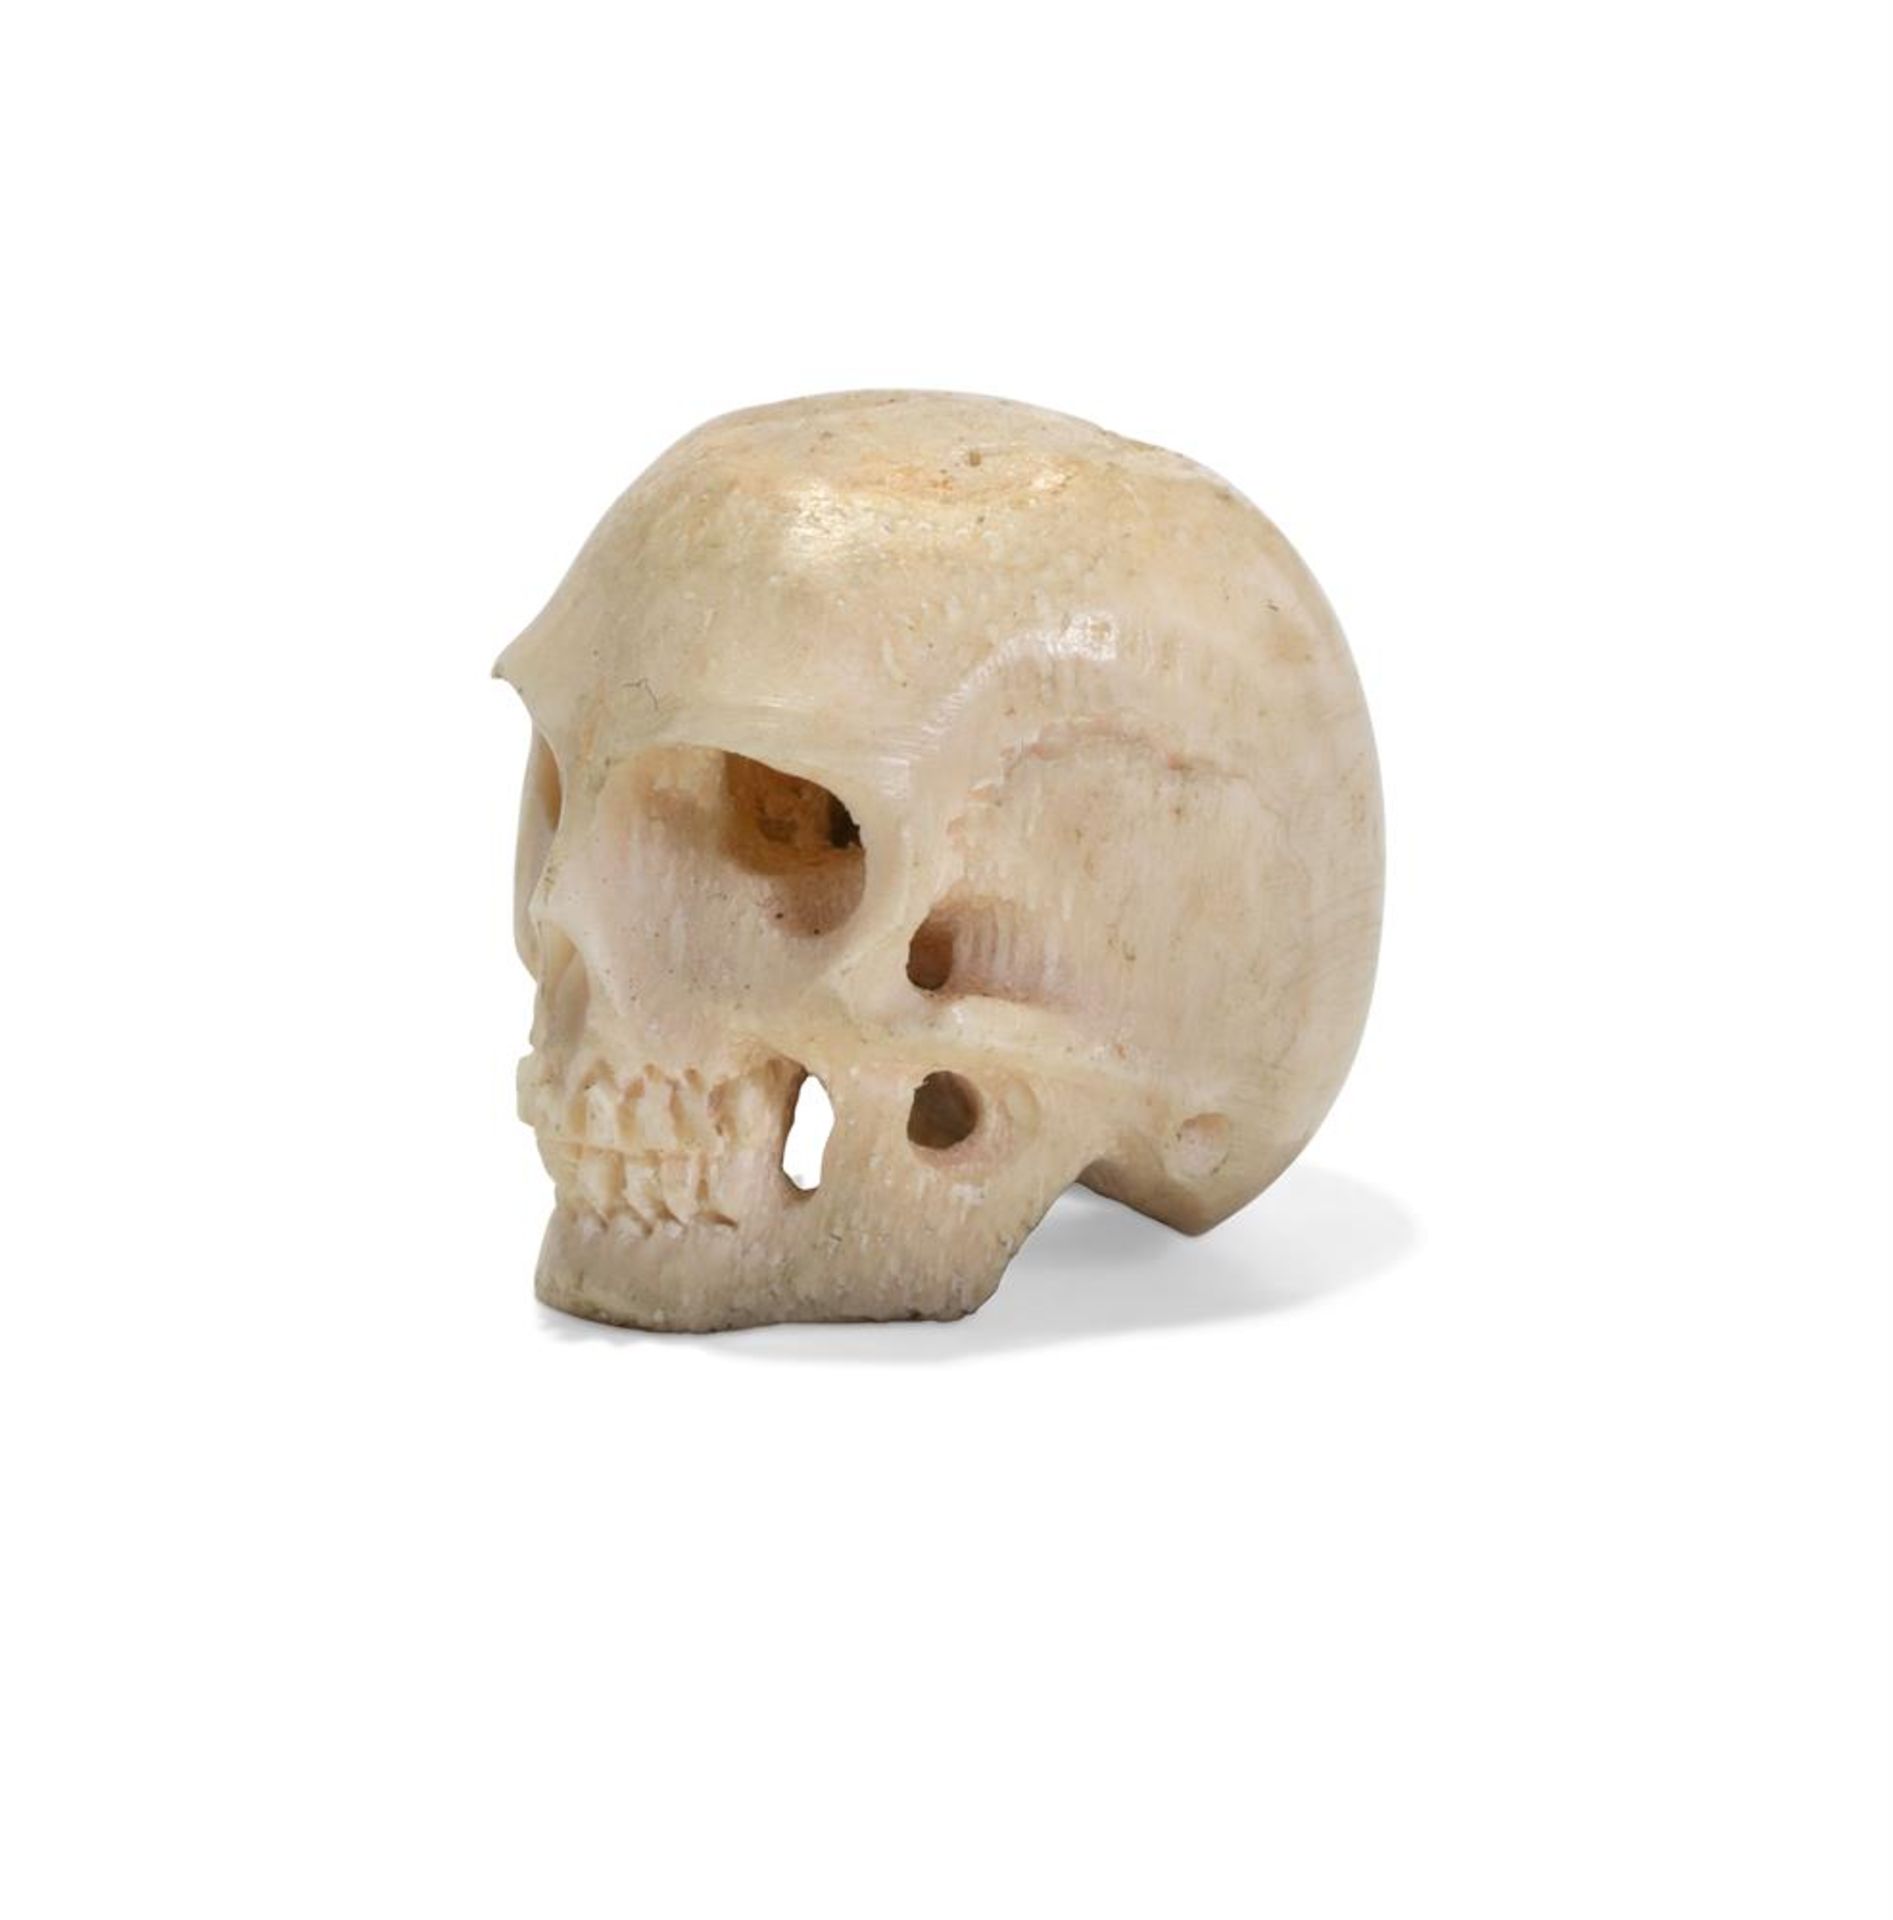 A TINY CARVED BONE MODEL OF A SKULL, PROBABLY JAPANESE OR ITALIAN